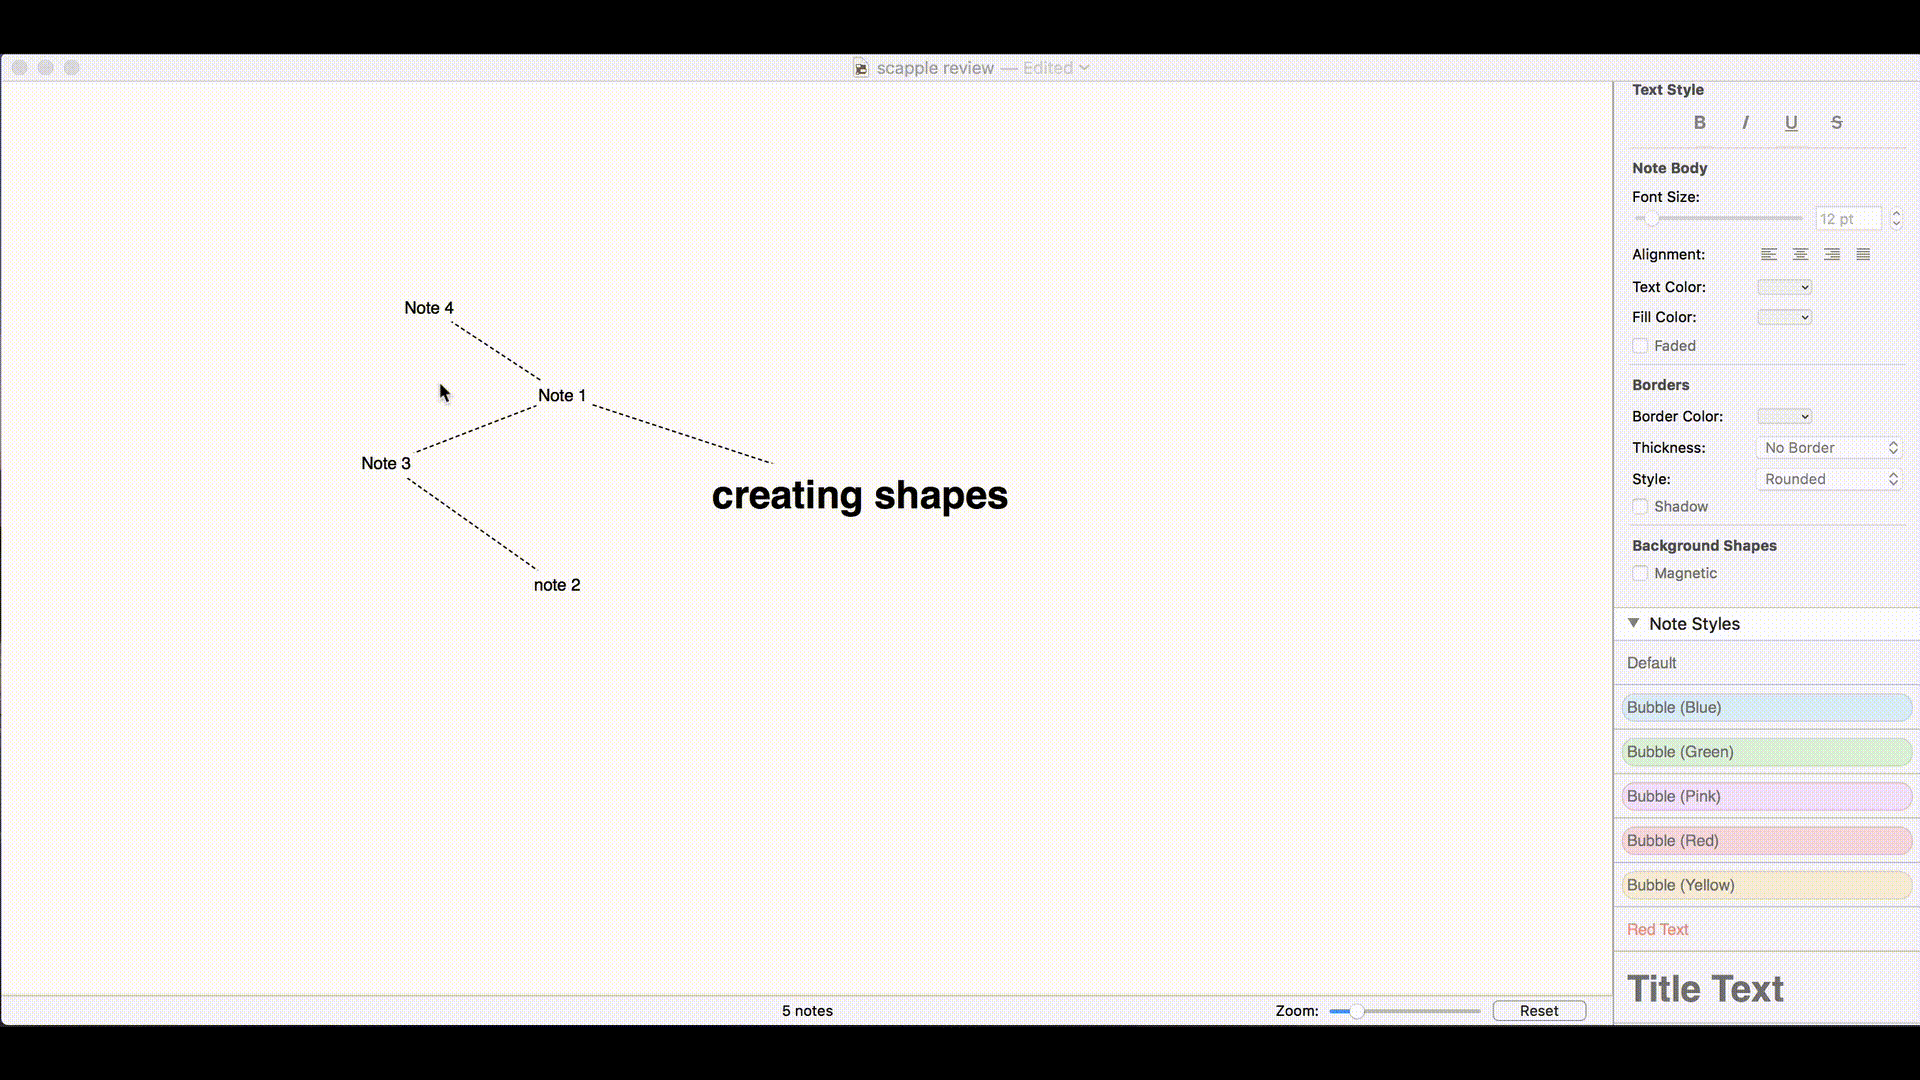 4. Creating Shapes to Compartmentalize Notes in Scapple